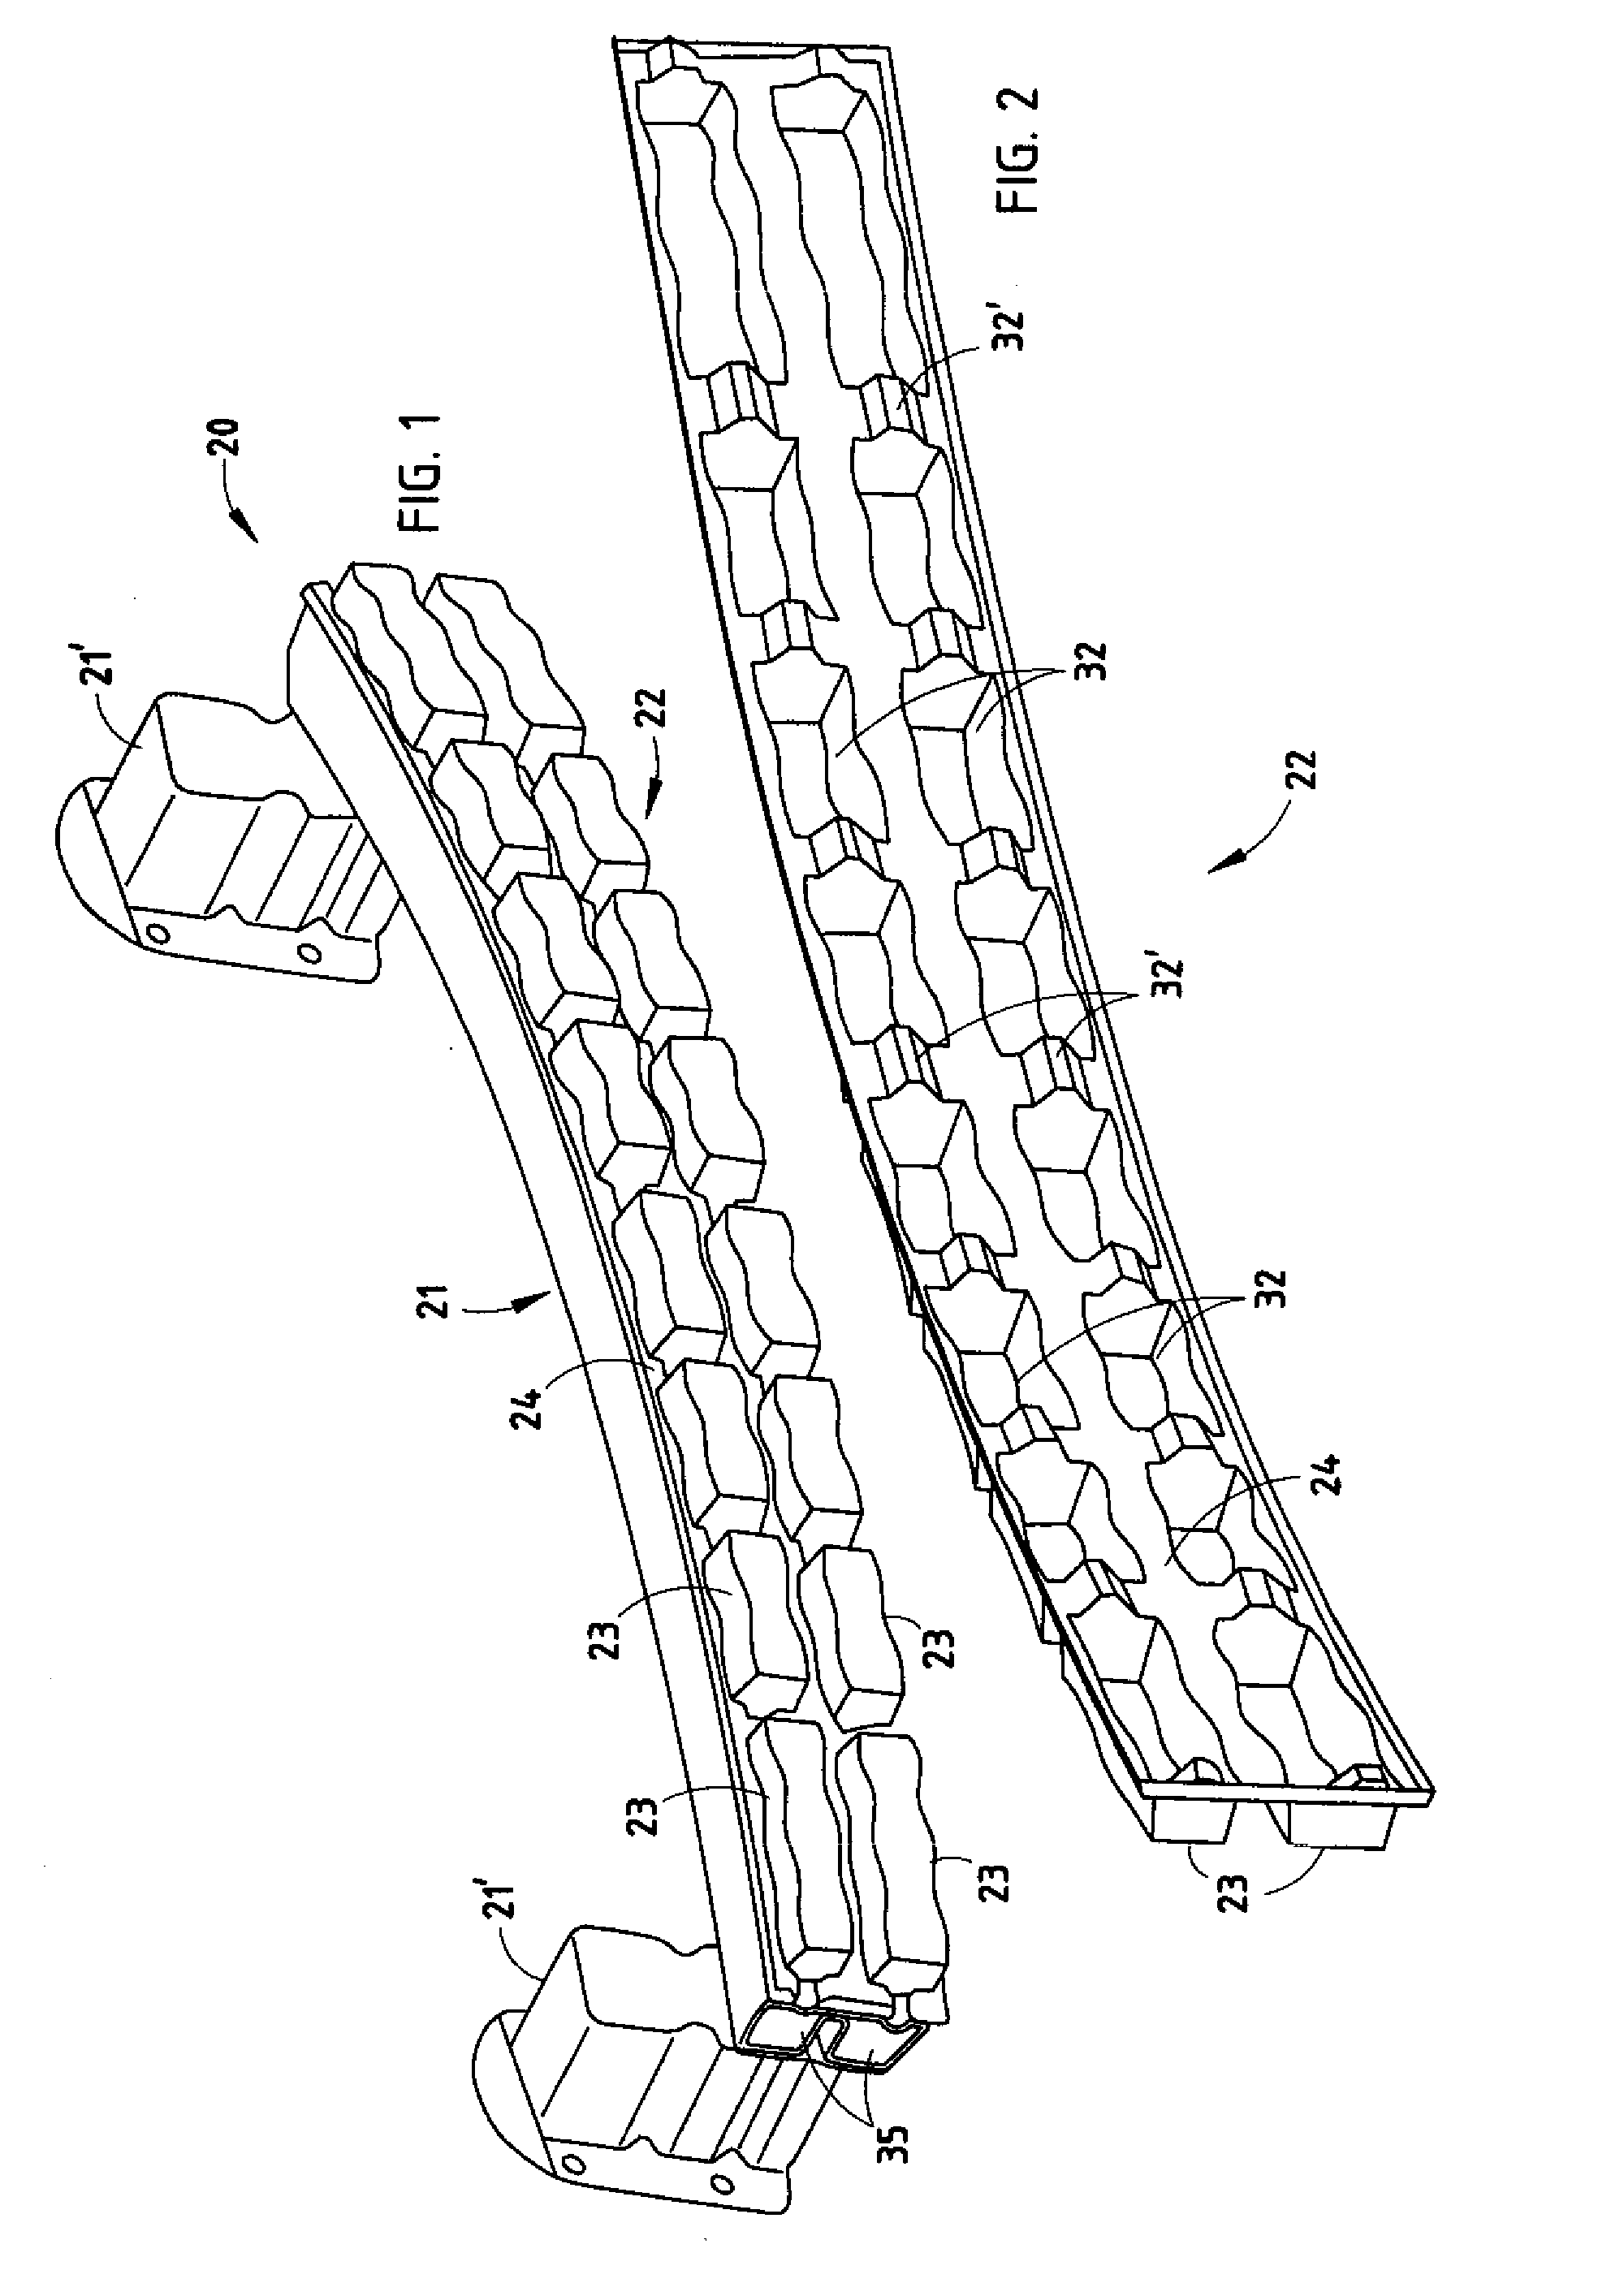 Method of constructing bumper incorporating thermoformed energy absorber